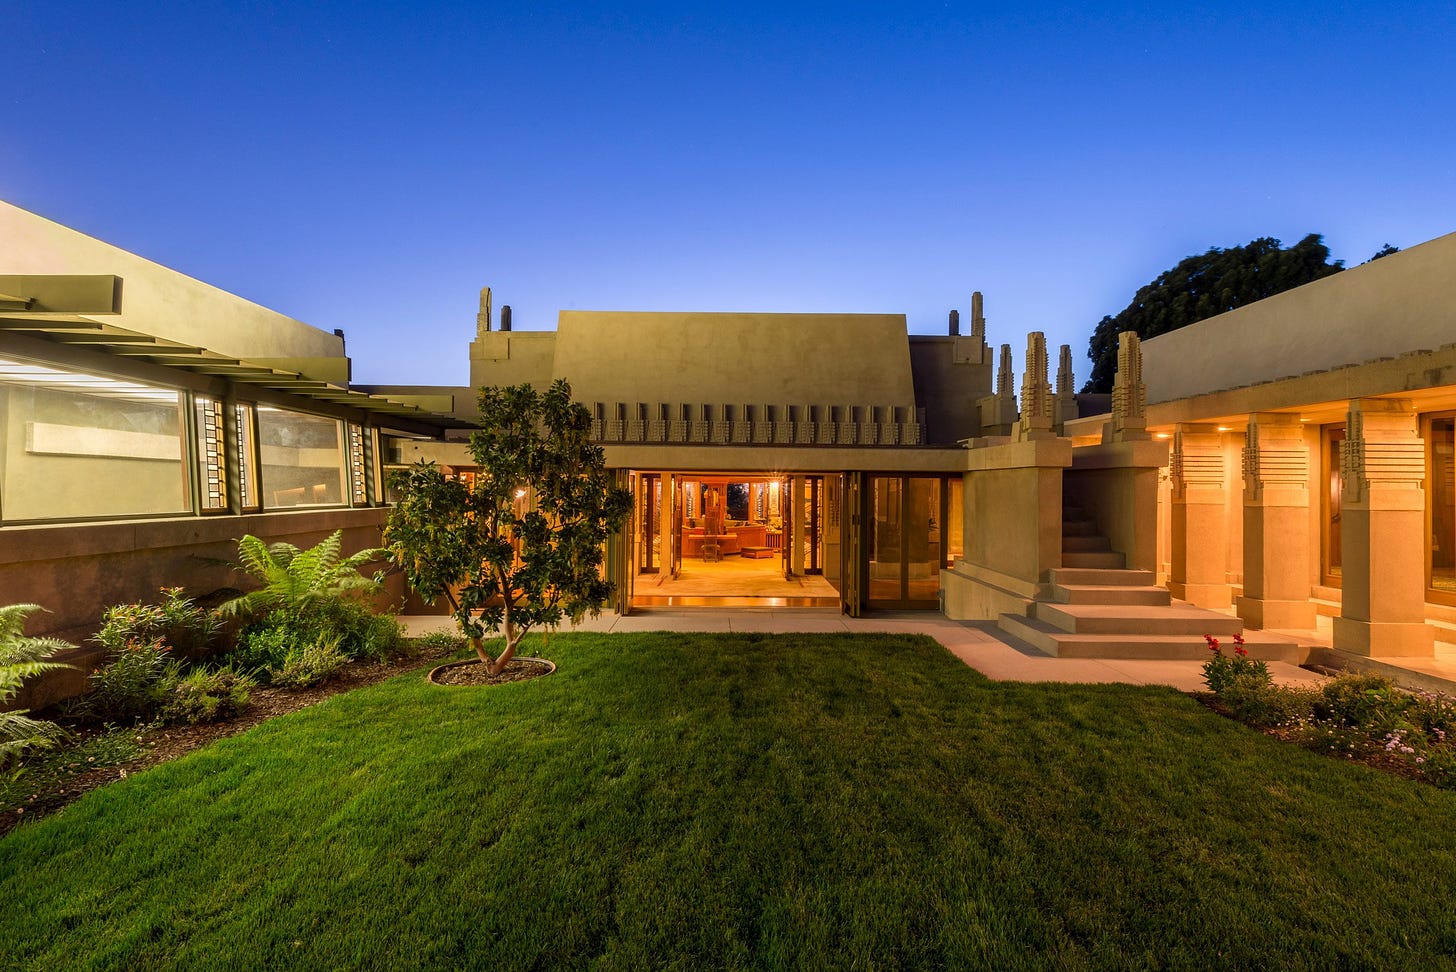 Frank Lloyd Wright's Hollyhock House is an early example of Mayan Revival